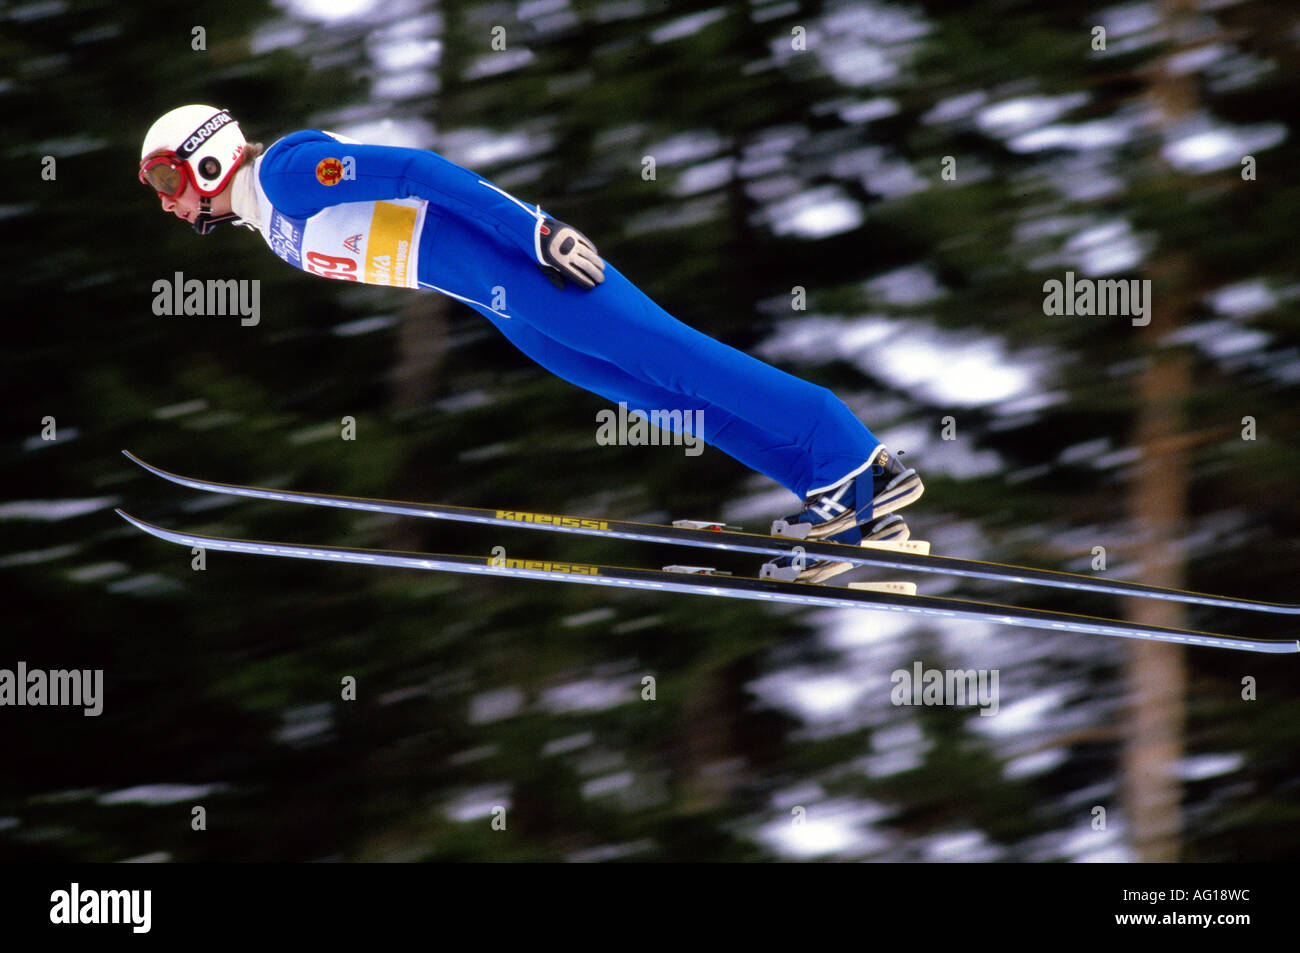 German Athlete Ski Jumper Stock Photos German Athlete Ski Jumper with regard to The Brilliant along with Gorgeous ski jumping nordic tournament intended for Your property